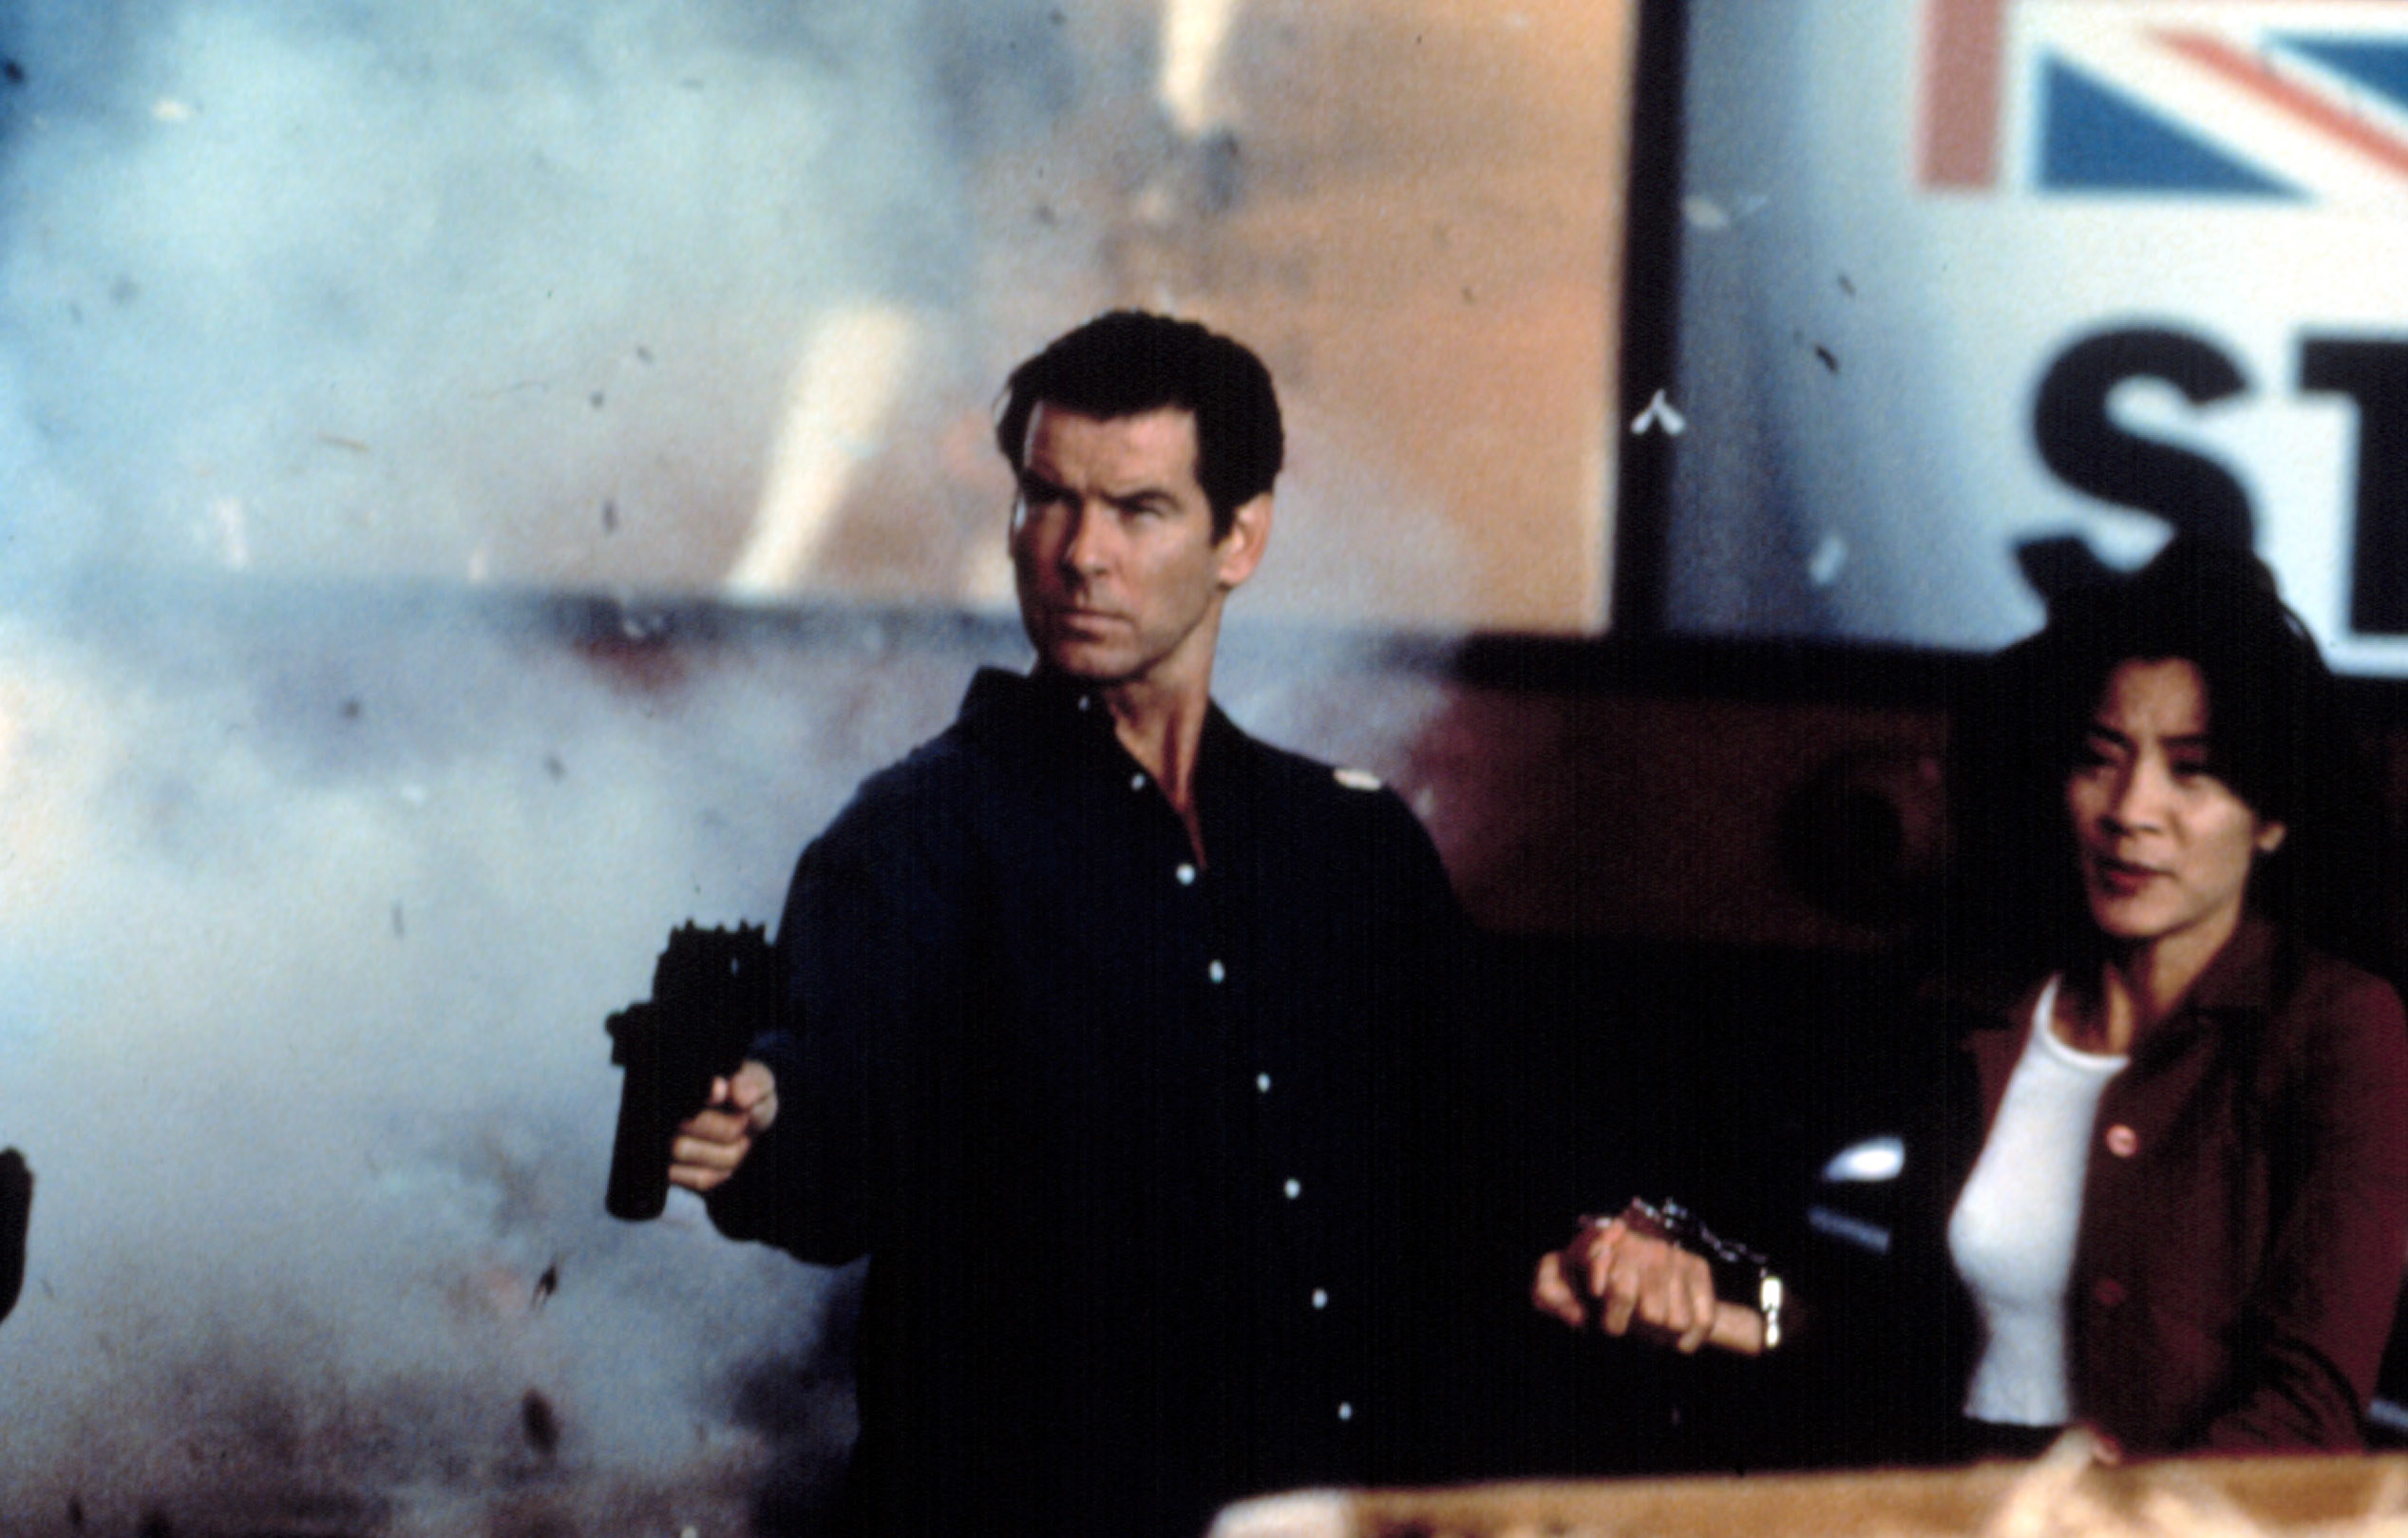 Pierce fires a gun with Michelle nearby in the film